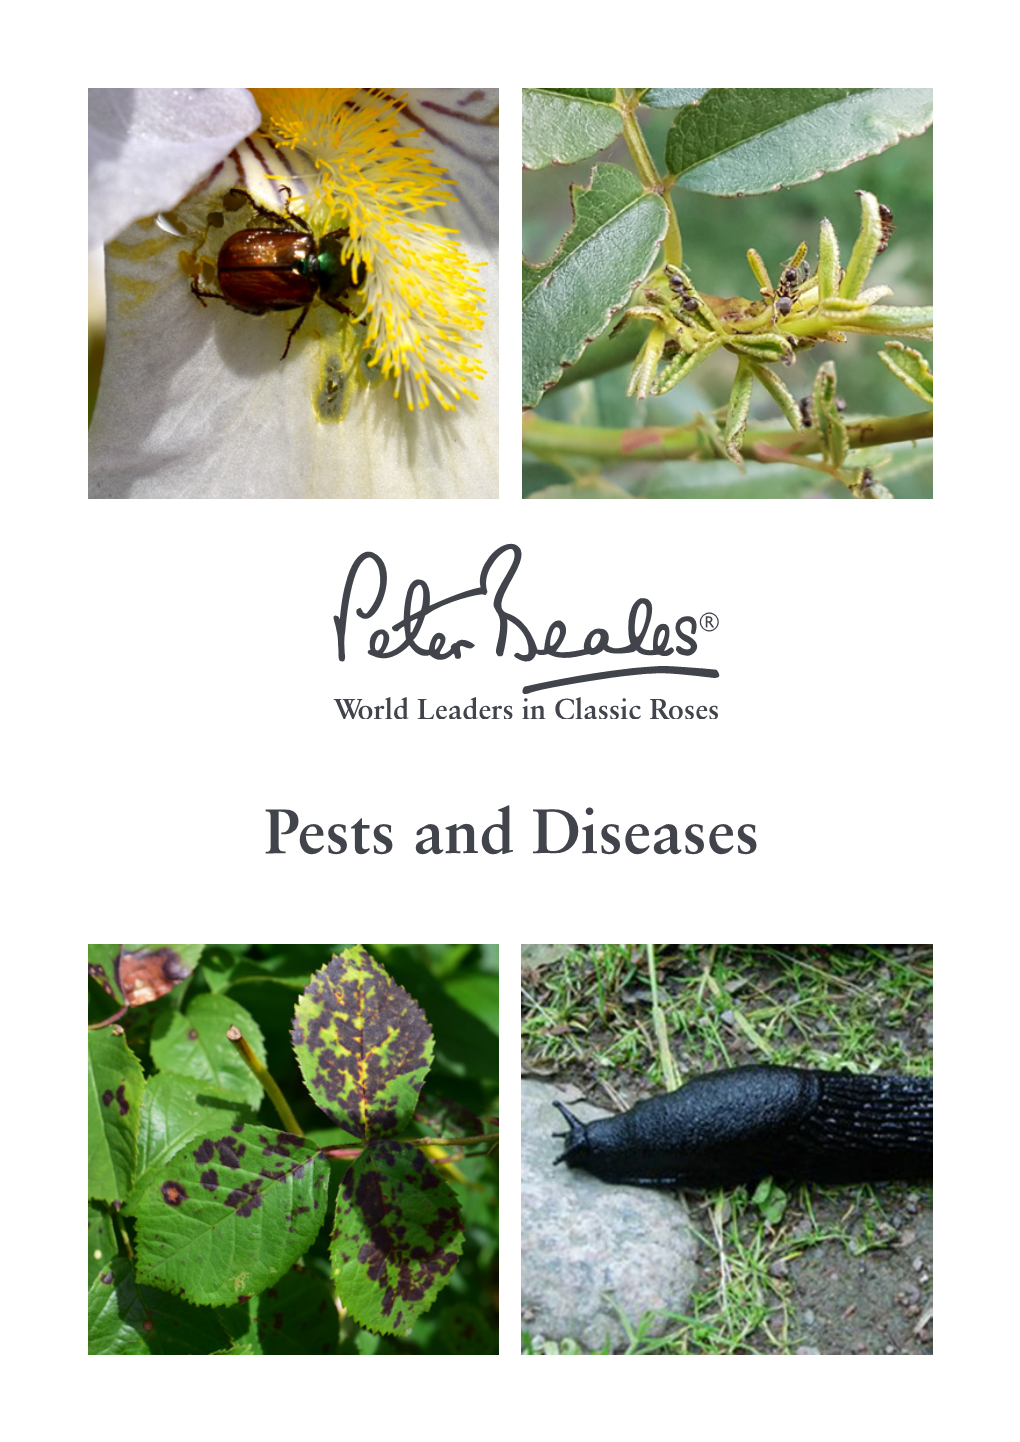 Pests and Diseases Guide